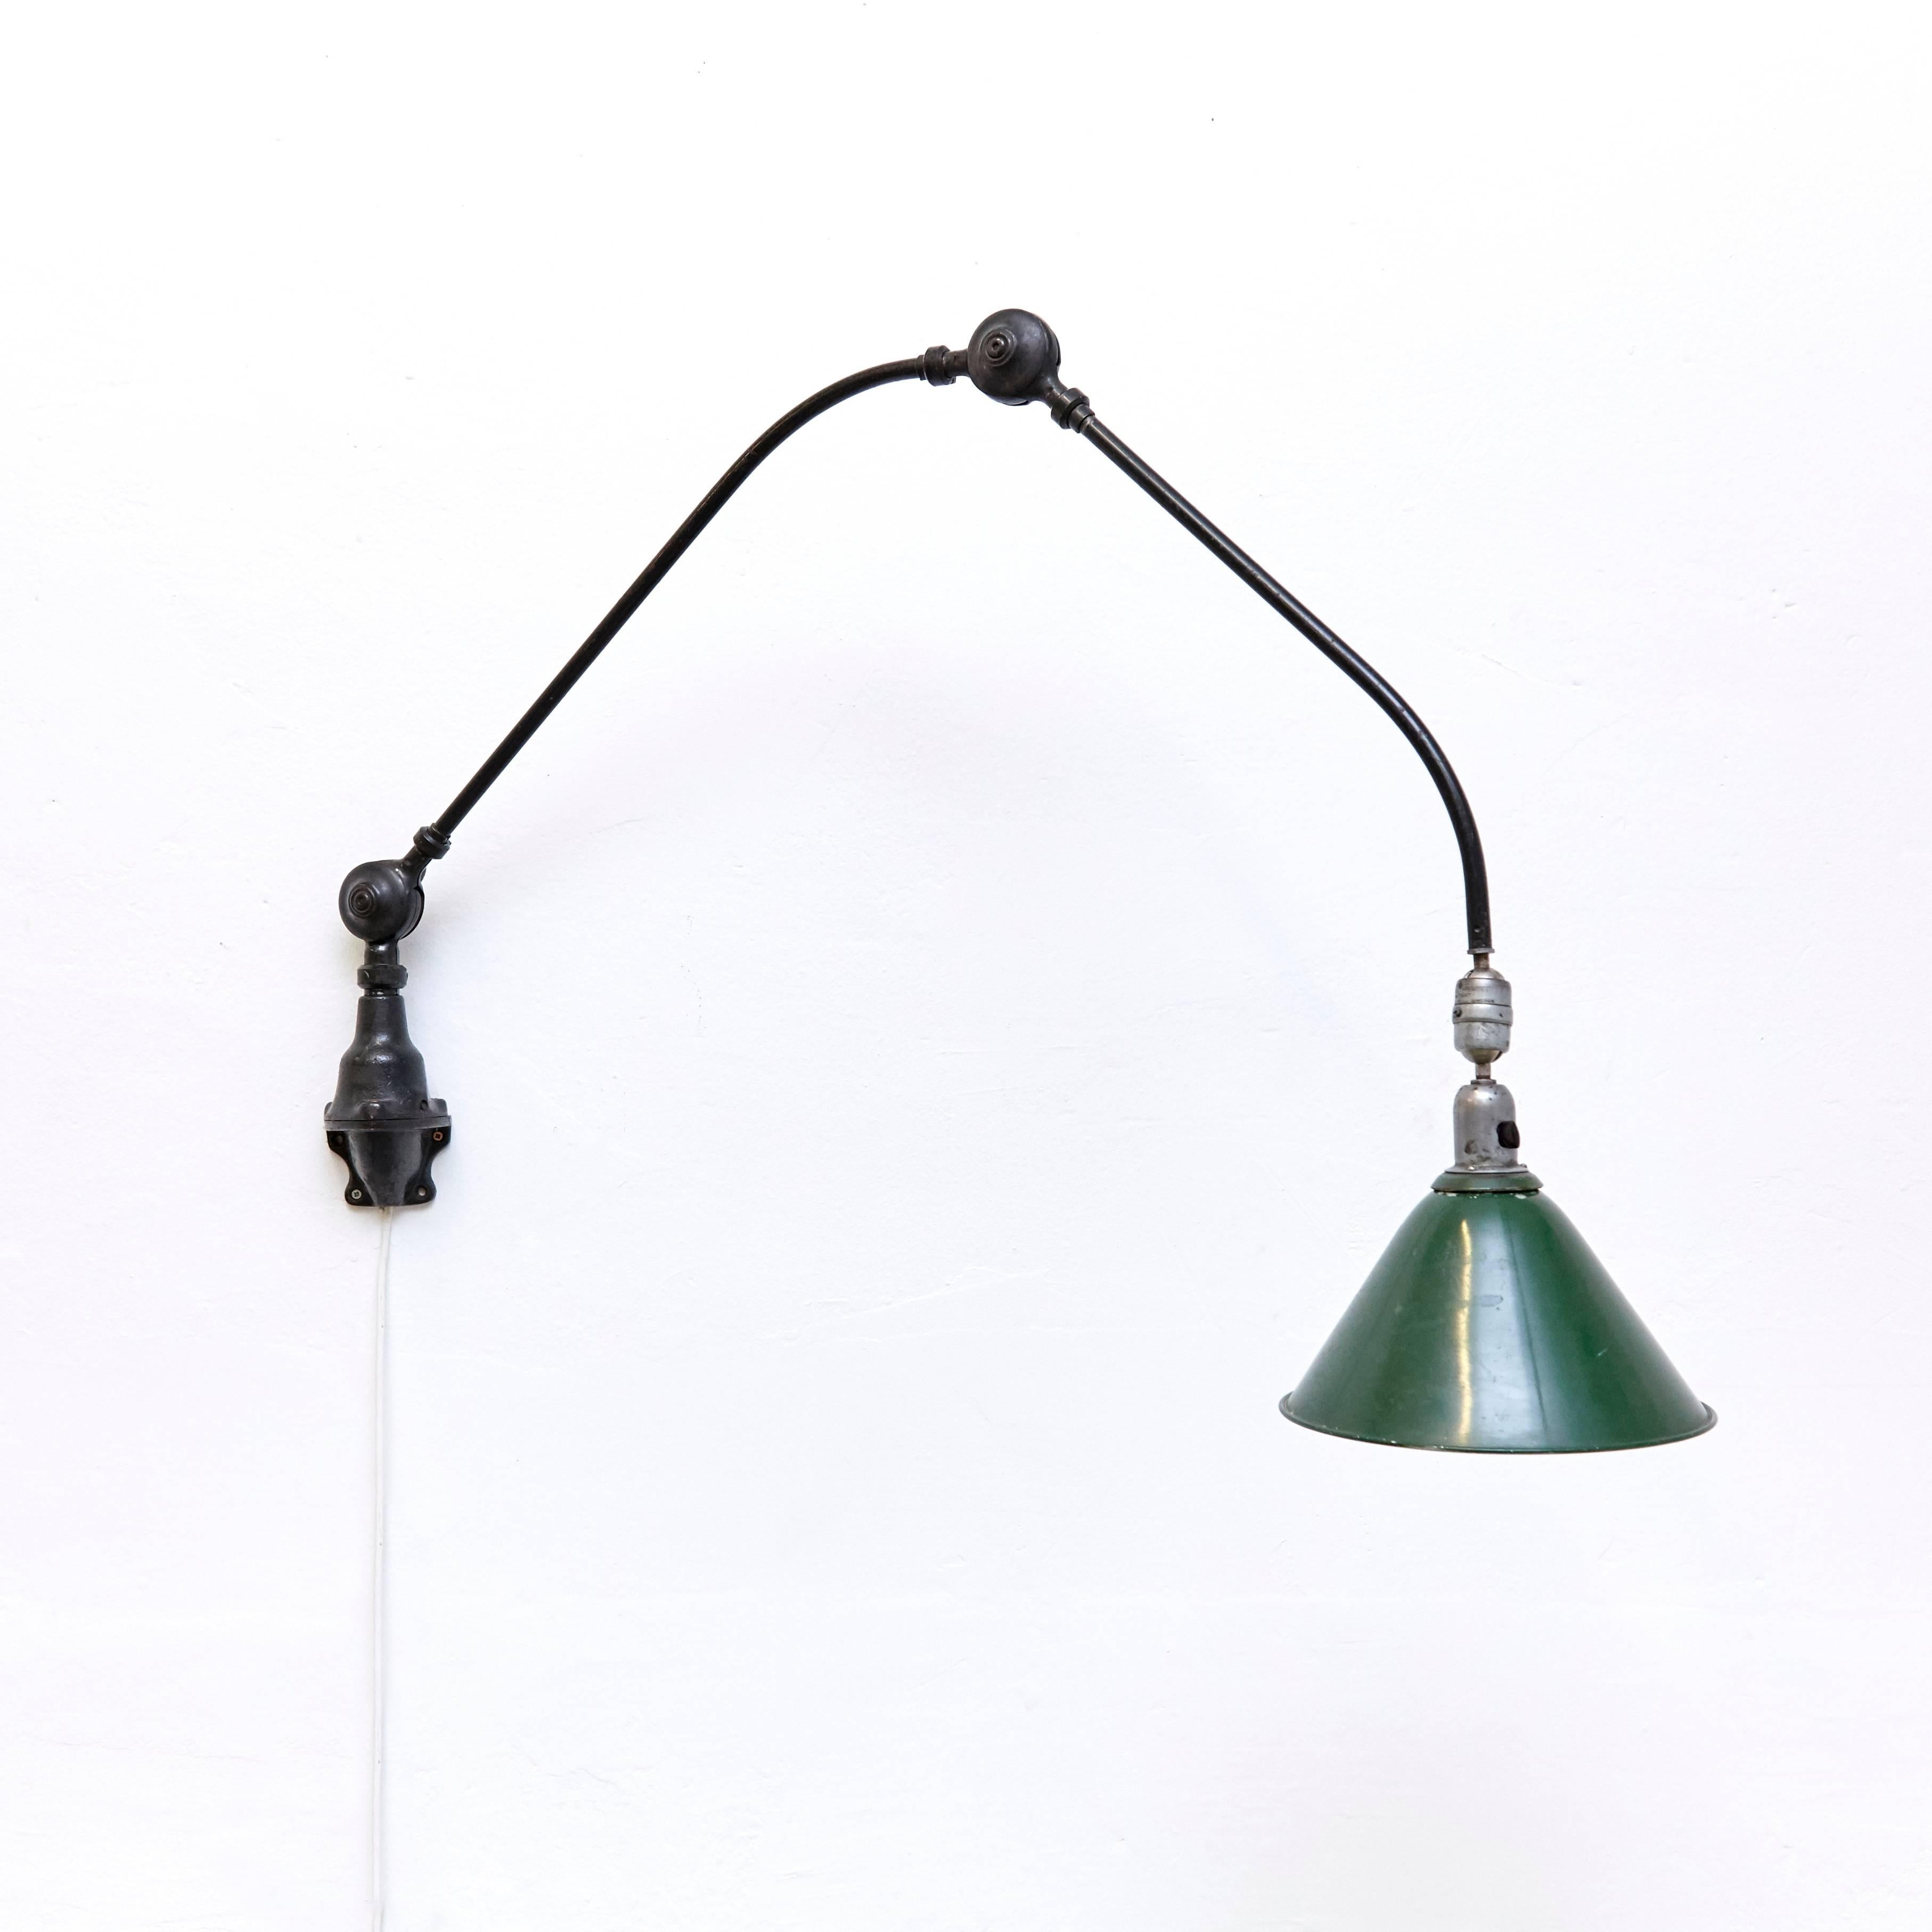 Wall lamp designed by Johan Petter Johansson.
Manufactured by Triplex (Sweden), circa 1930.
Aluminium and steel.

Measures: Height 94 x width 123 cm 26.5 diameter

In good original condition, with minor wear consistent with age and use,